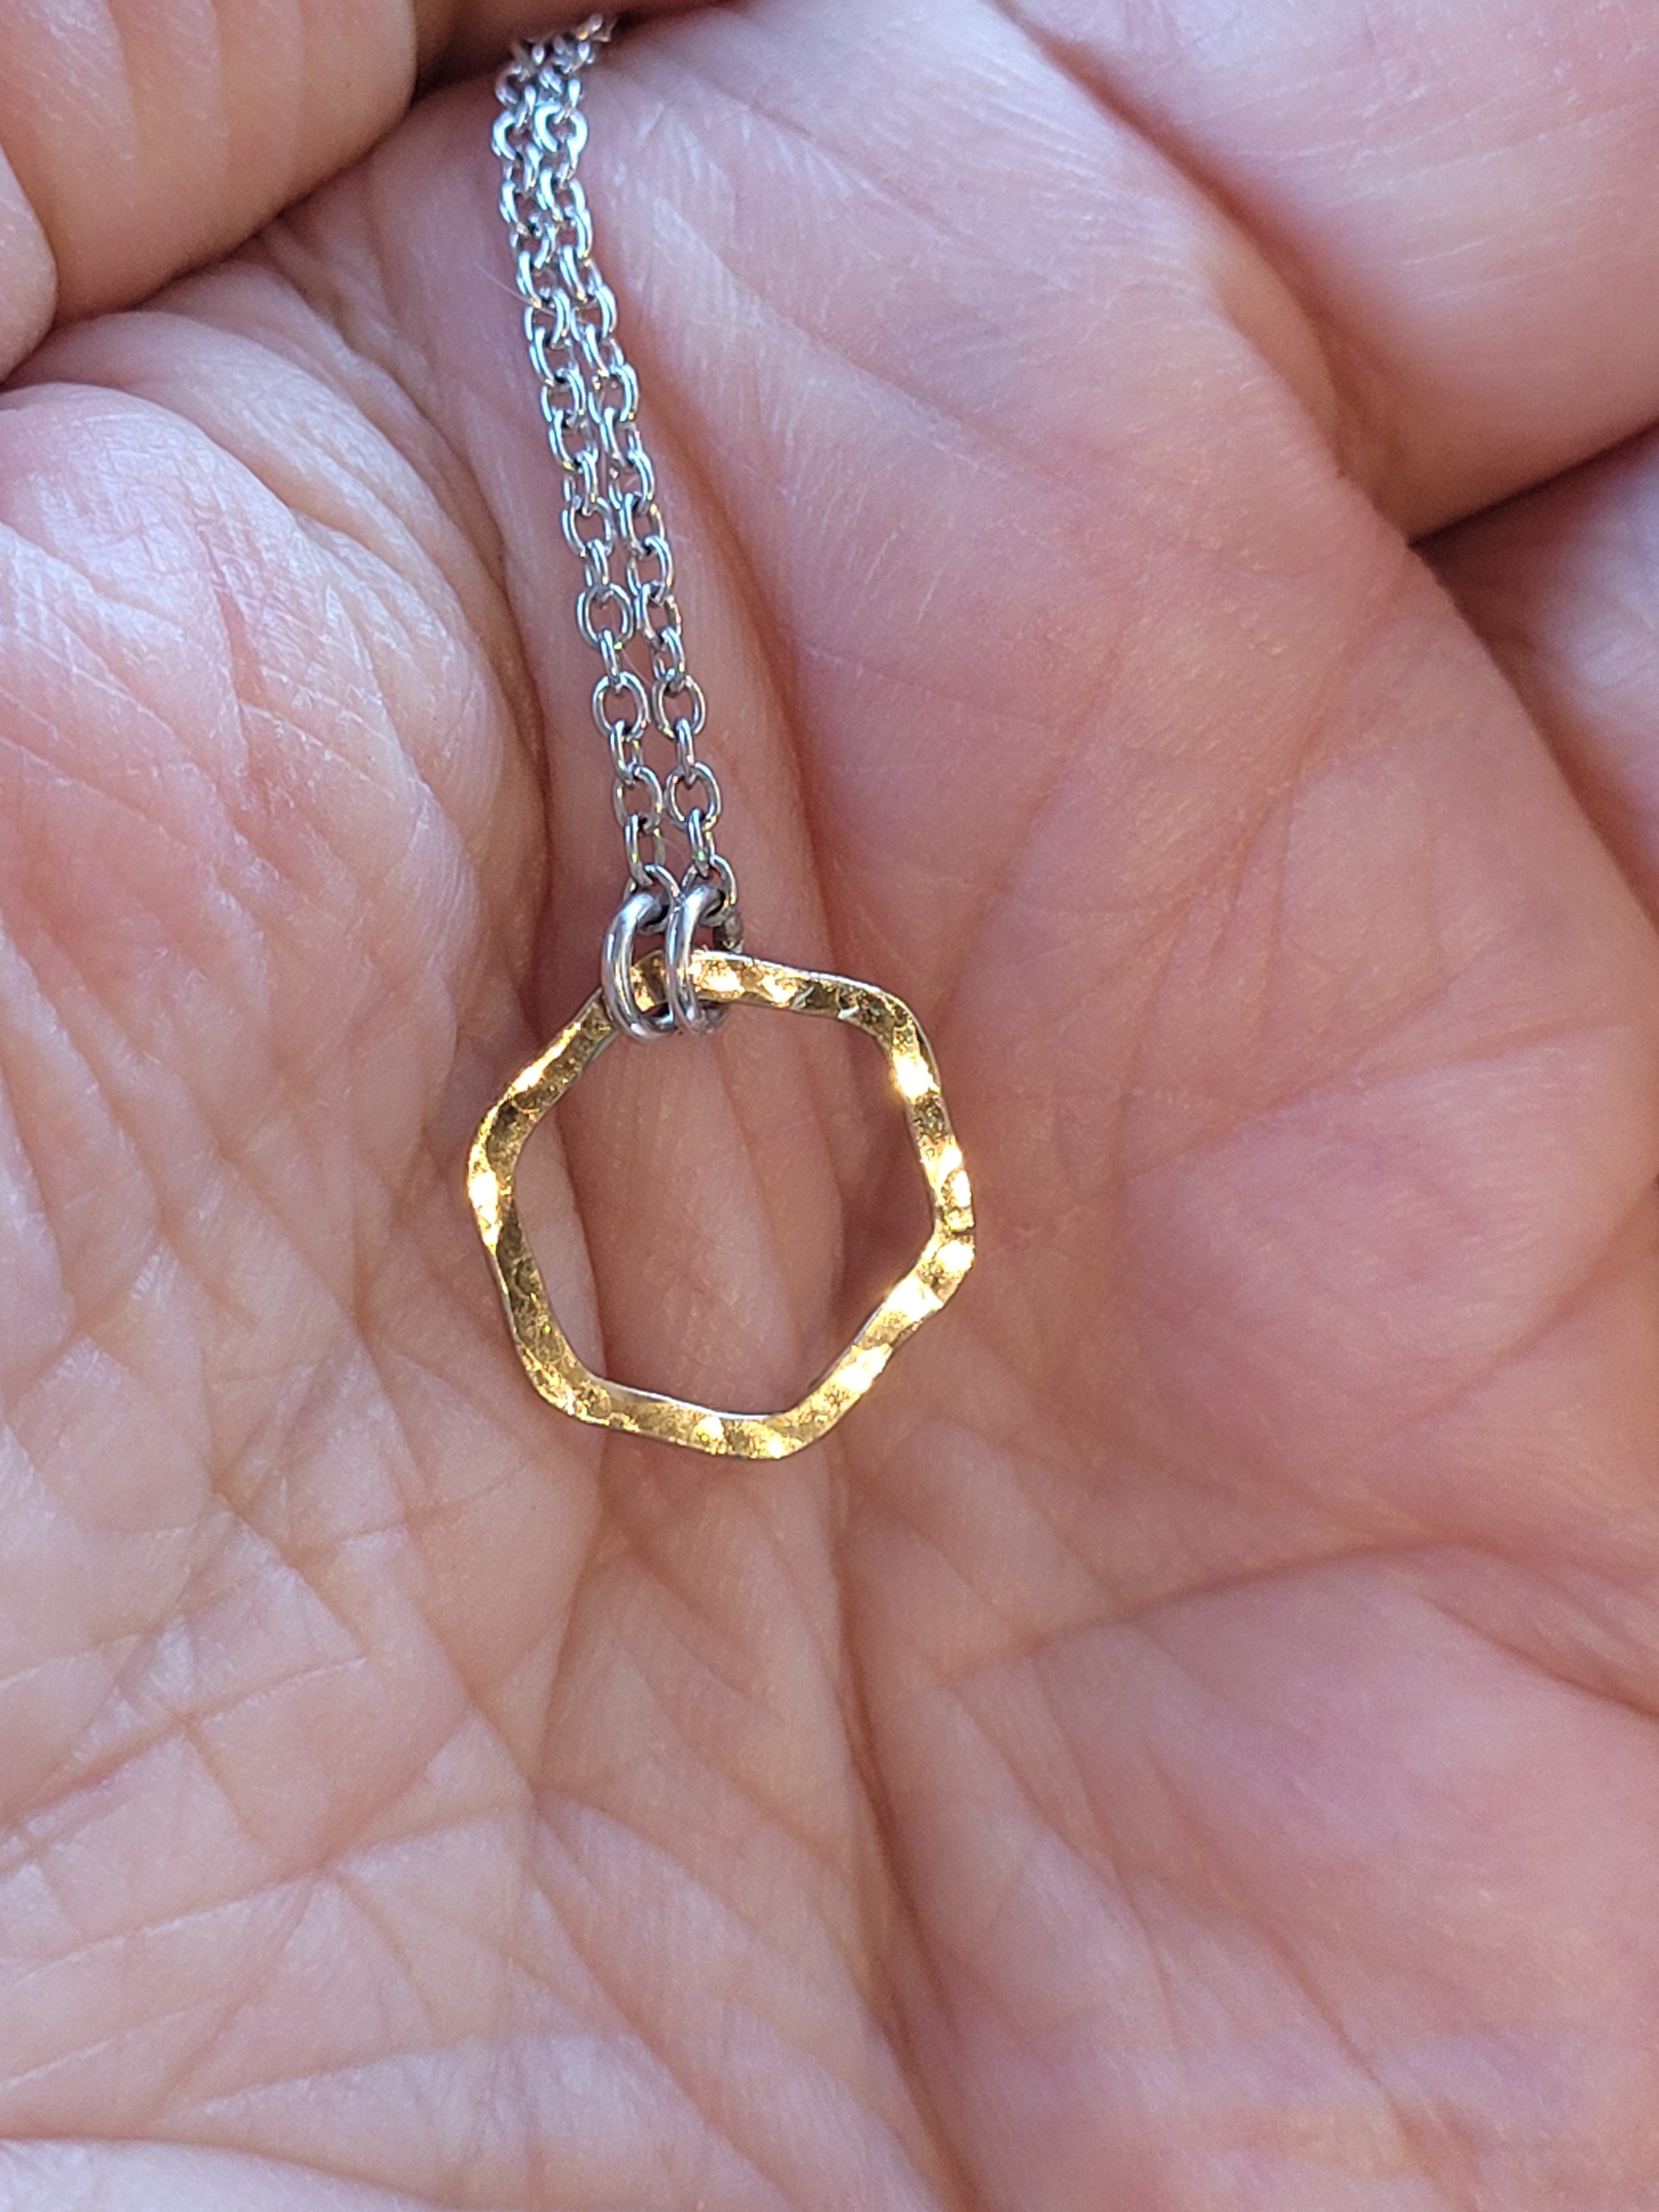 Hexagon hammered 14k gold (solid gold)pendant